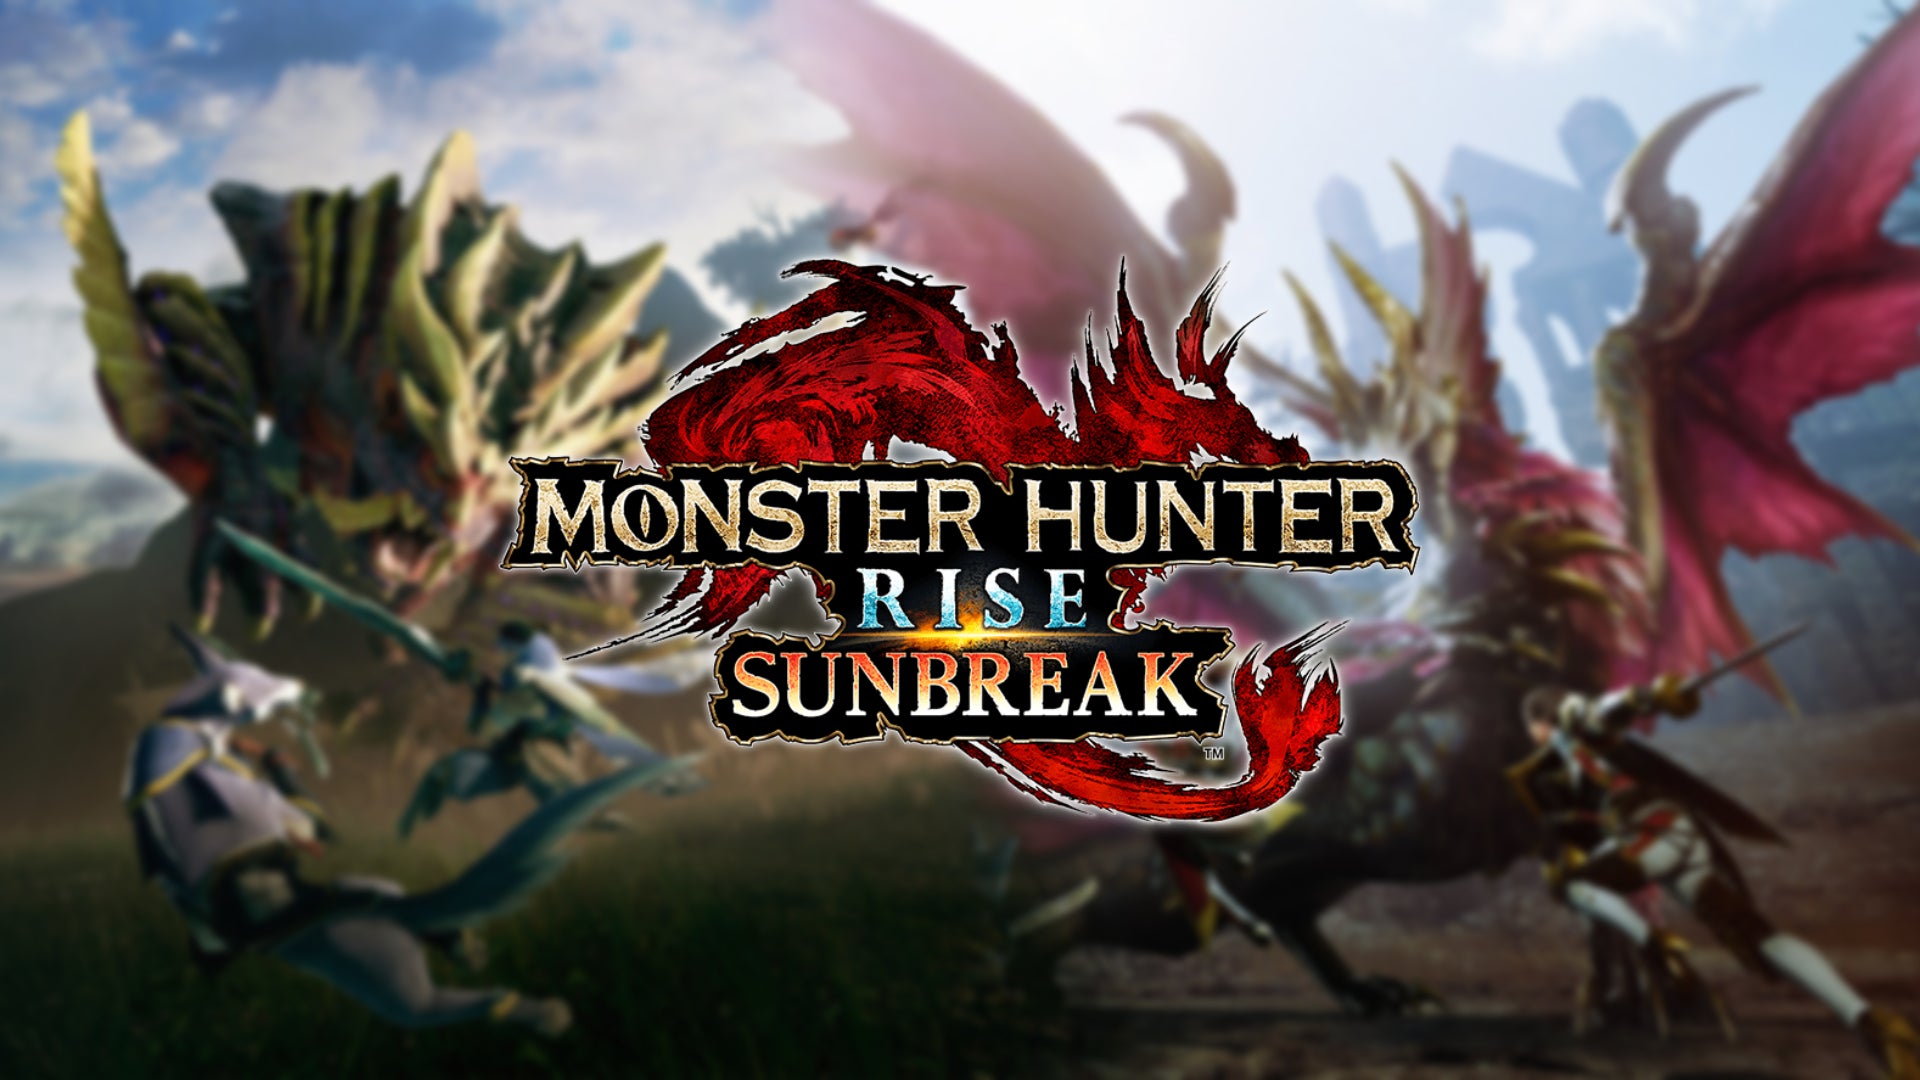 Image for 20% of Monster Hunter Rise players have already bought Sunbreak DLC